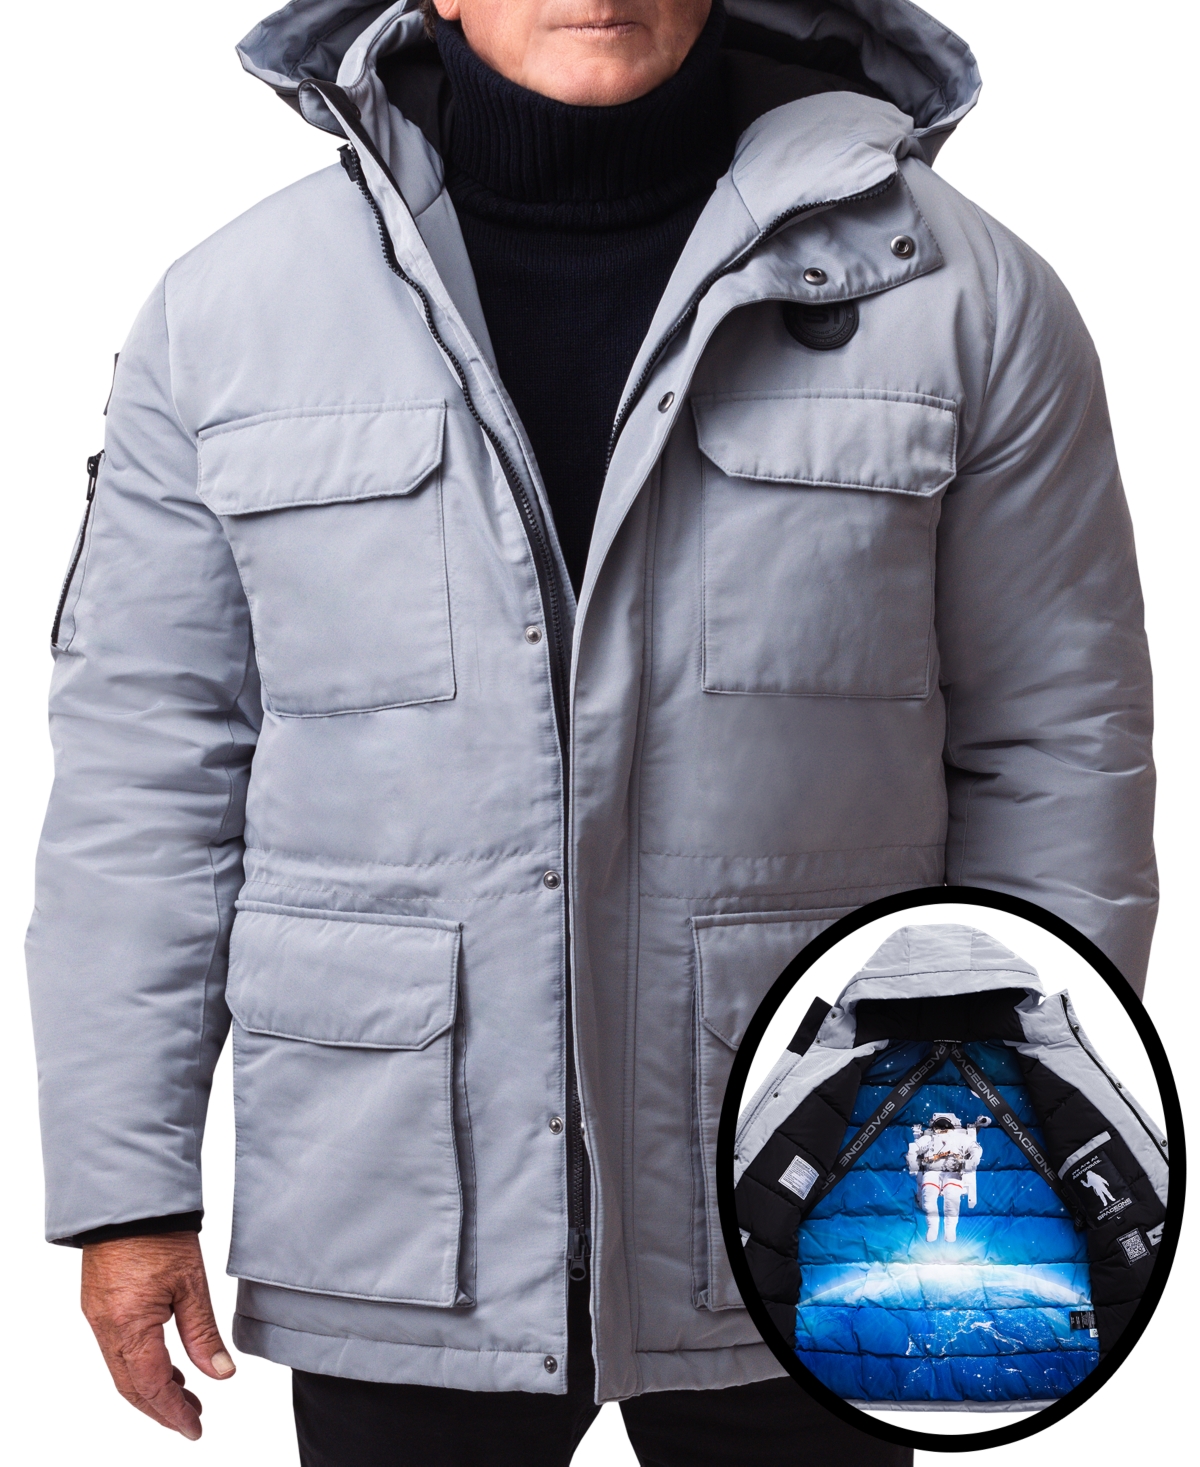 Space One Men's Nasa Inspired Parka Jacket With Printed Astronaut Interior In Gray